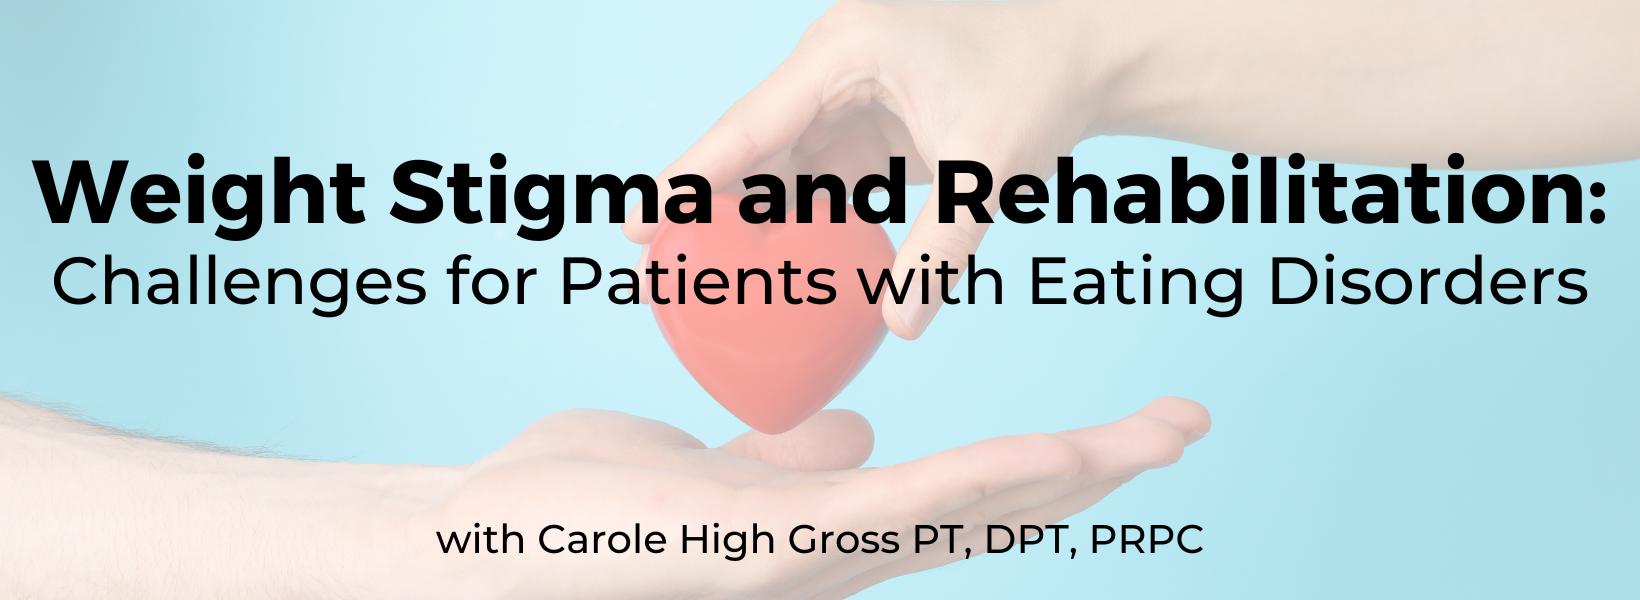 Weight Stigma and Rehabilitation: Challenges for Patients with Eating Disorders